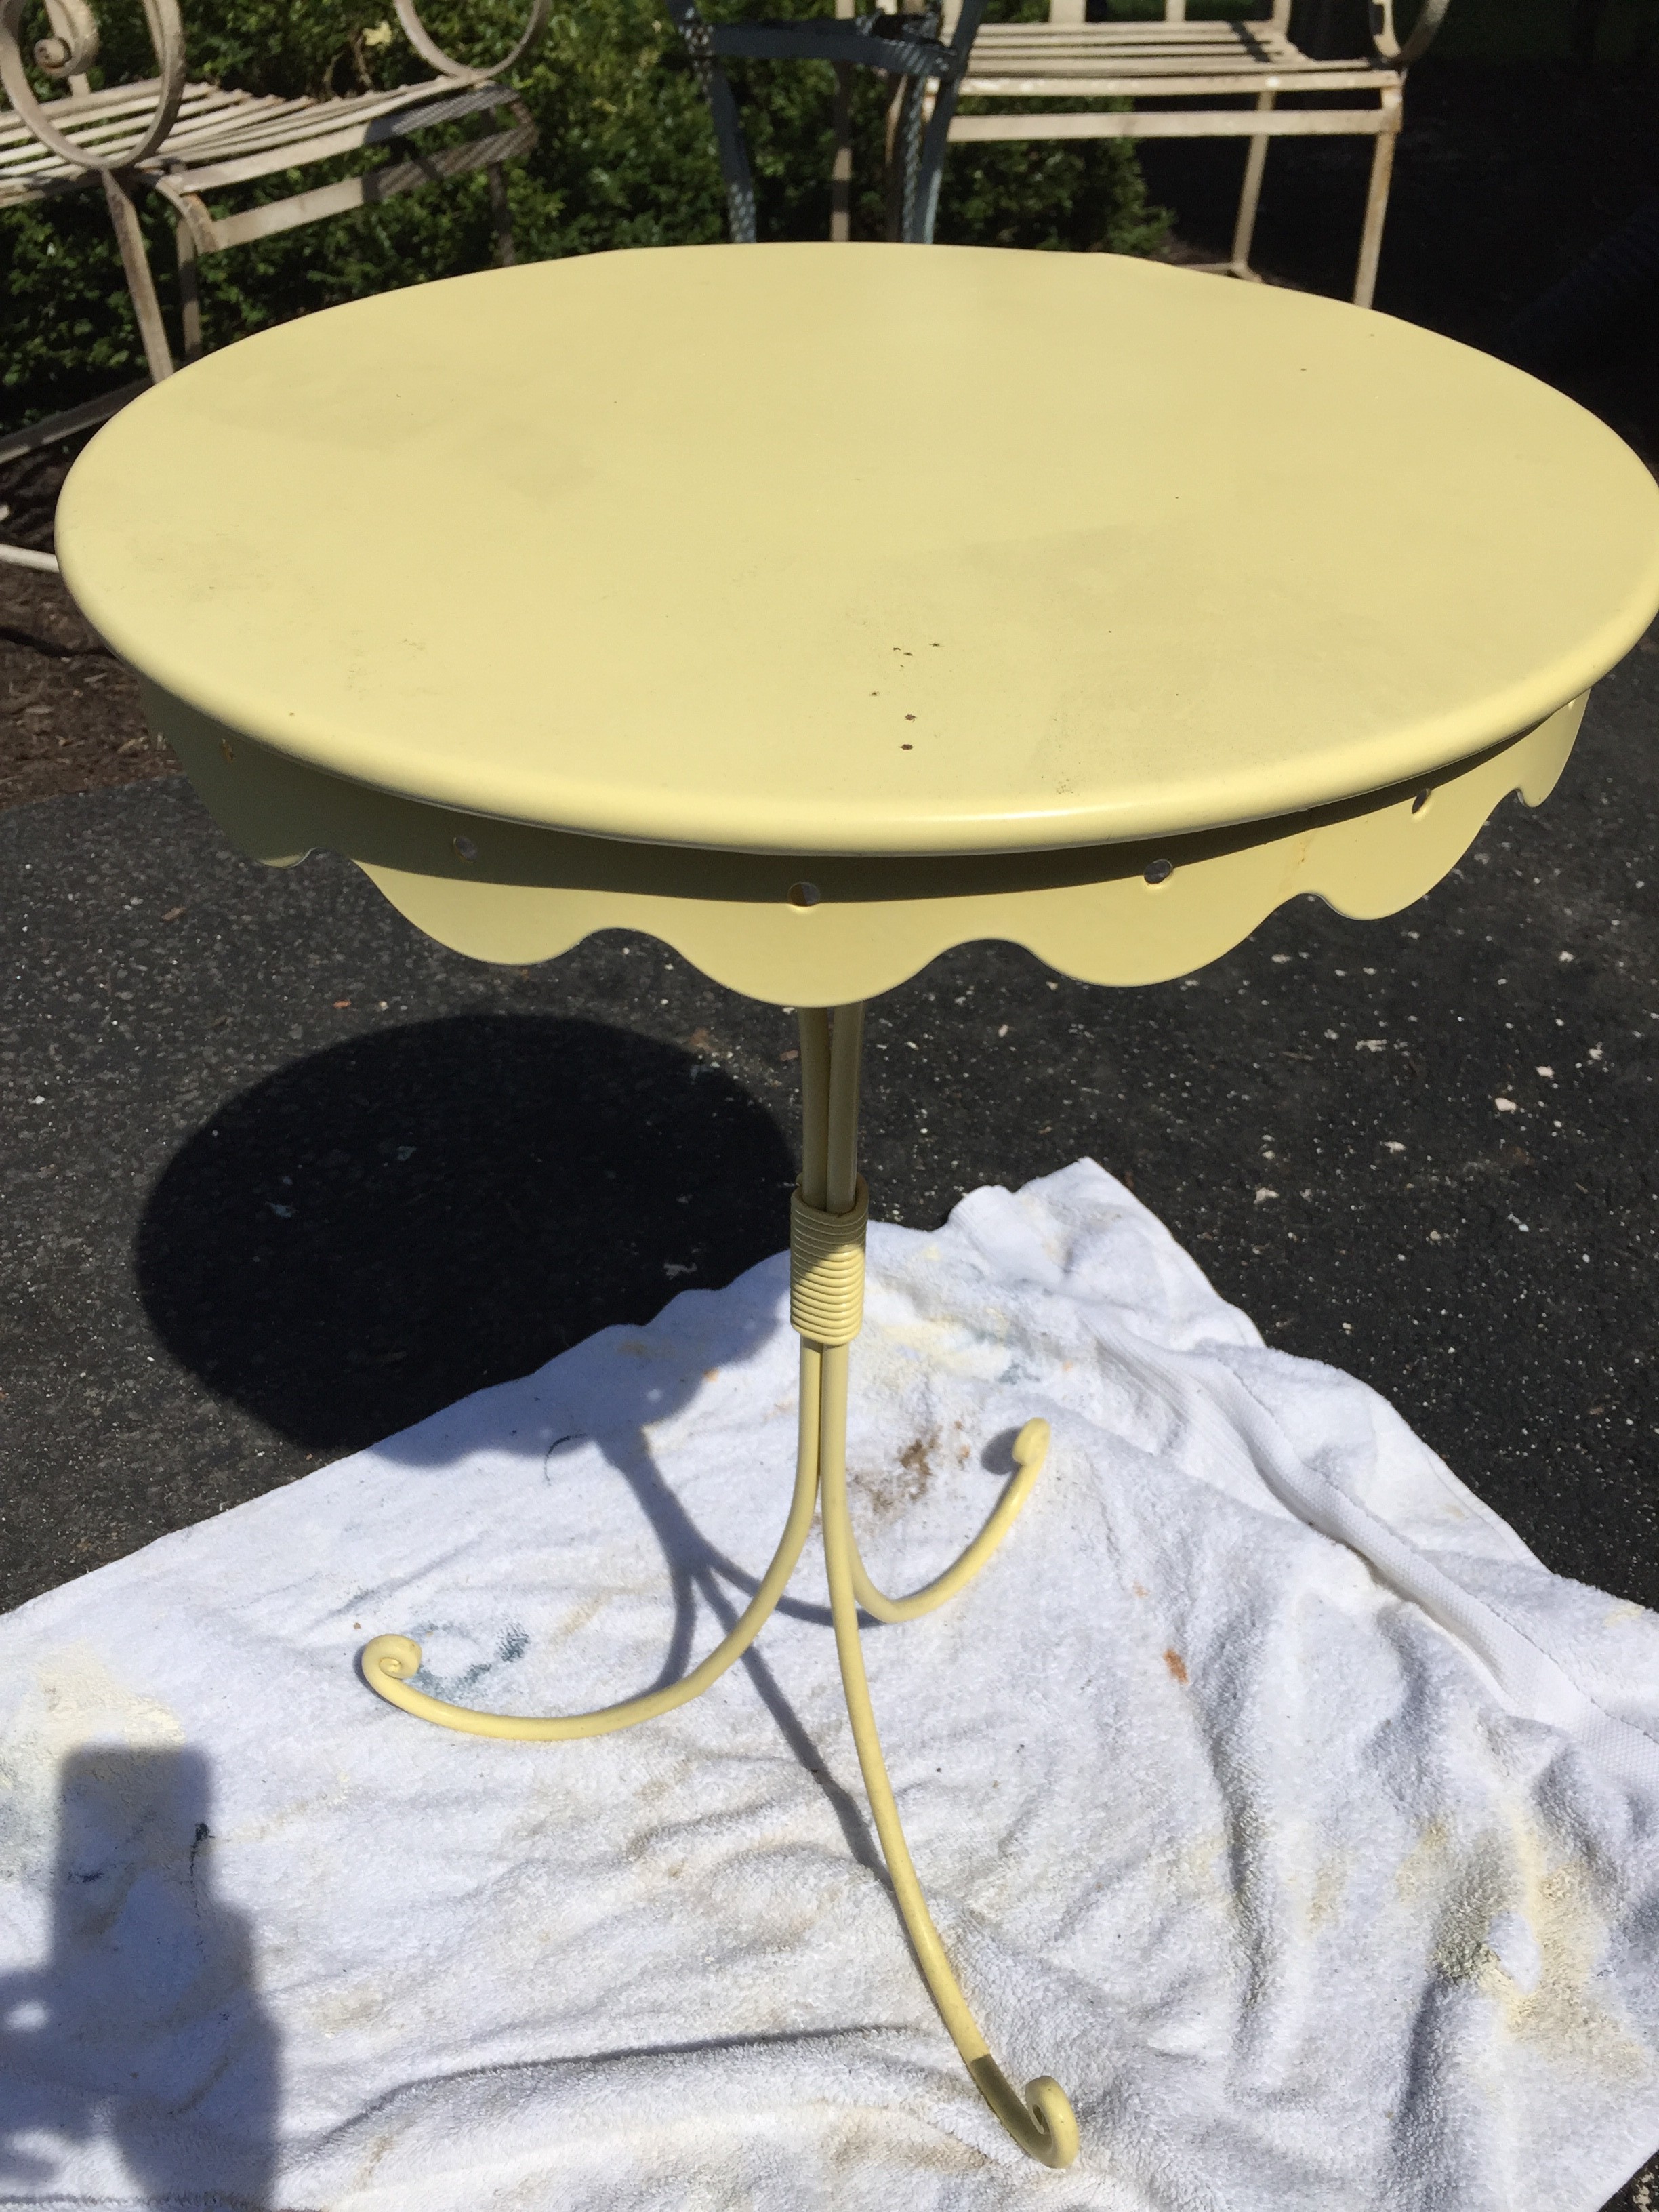 painting outdoor furniture img side table yellow offset umbrella small end tables target industrial cart coffee piece dining set elm hobby lobby sofa mosaic garden chairs grey